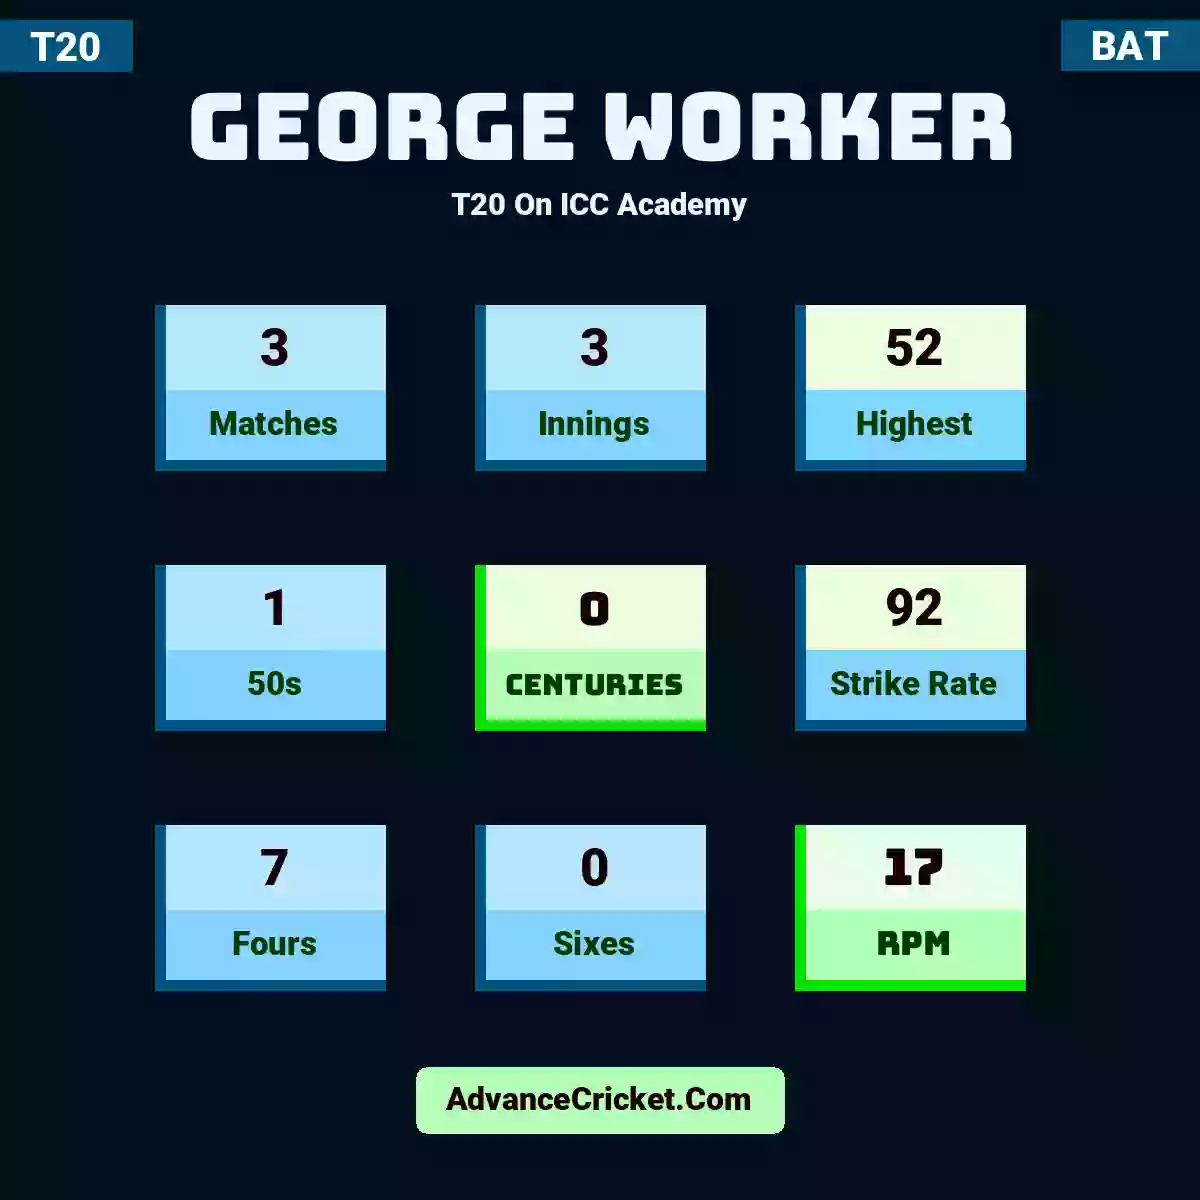 George Worker T20  On ICC Academy, George Worker played 3 matches, scored 52 runs as highest, 1 half-centuries, and 0 centuries, with a strike rate of 92. G.Worker hit 7 fours and 0 sixes, with an RPM of 17.